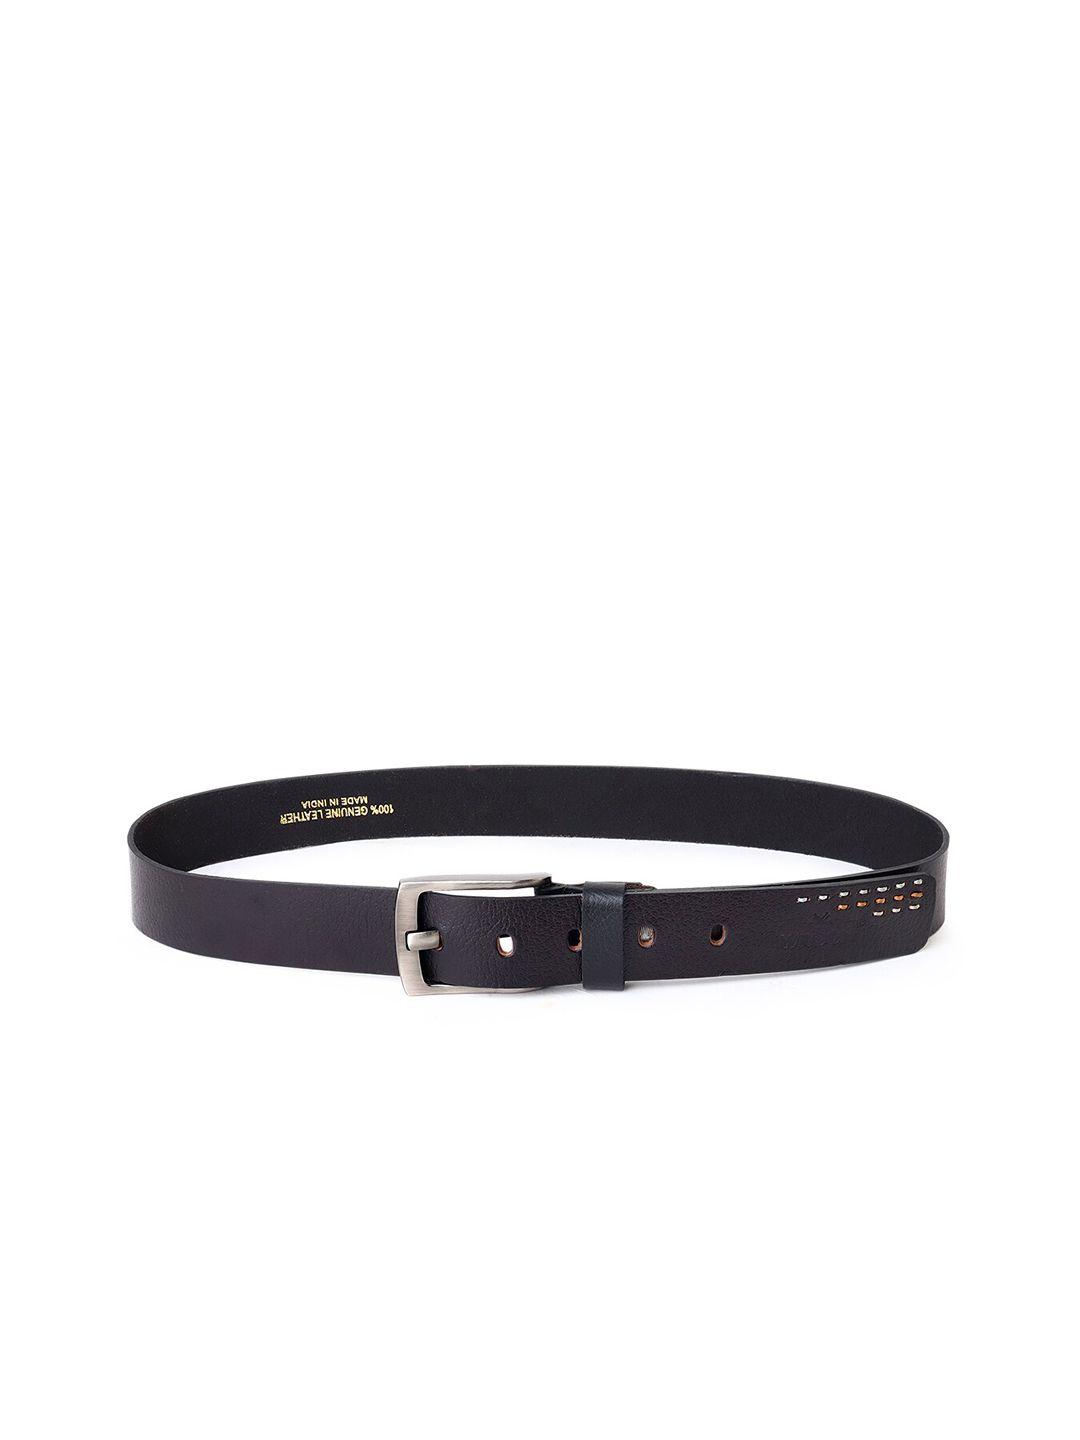 wrogn textured leather belt